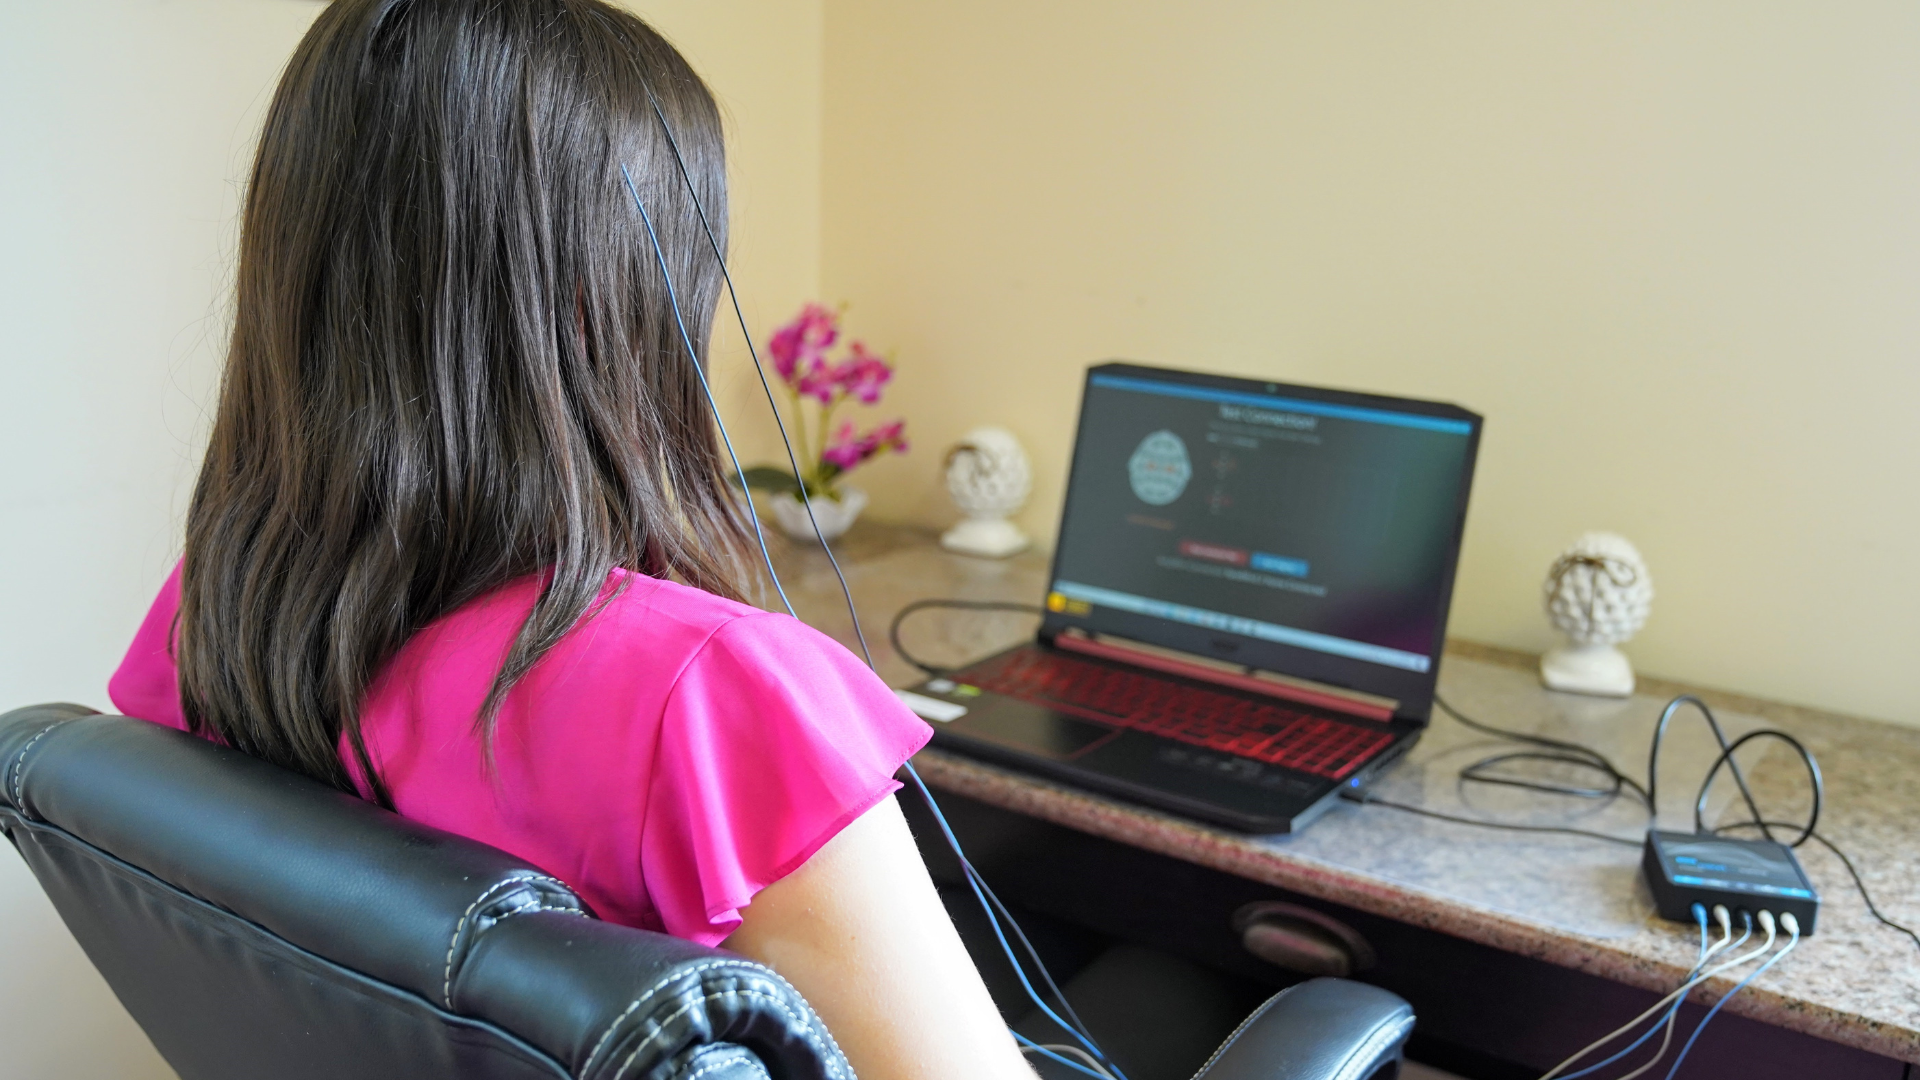 Neurofeedback Practice can Help Sufferers of Conditions such as Anxiety, Depression